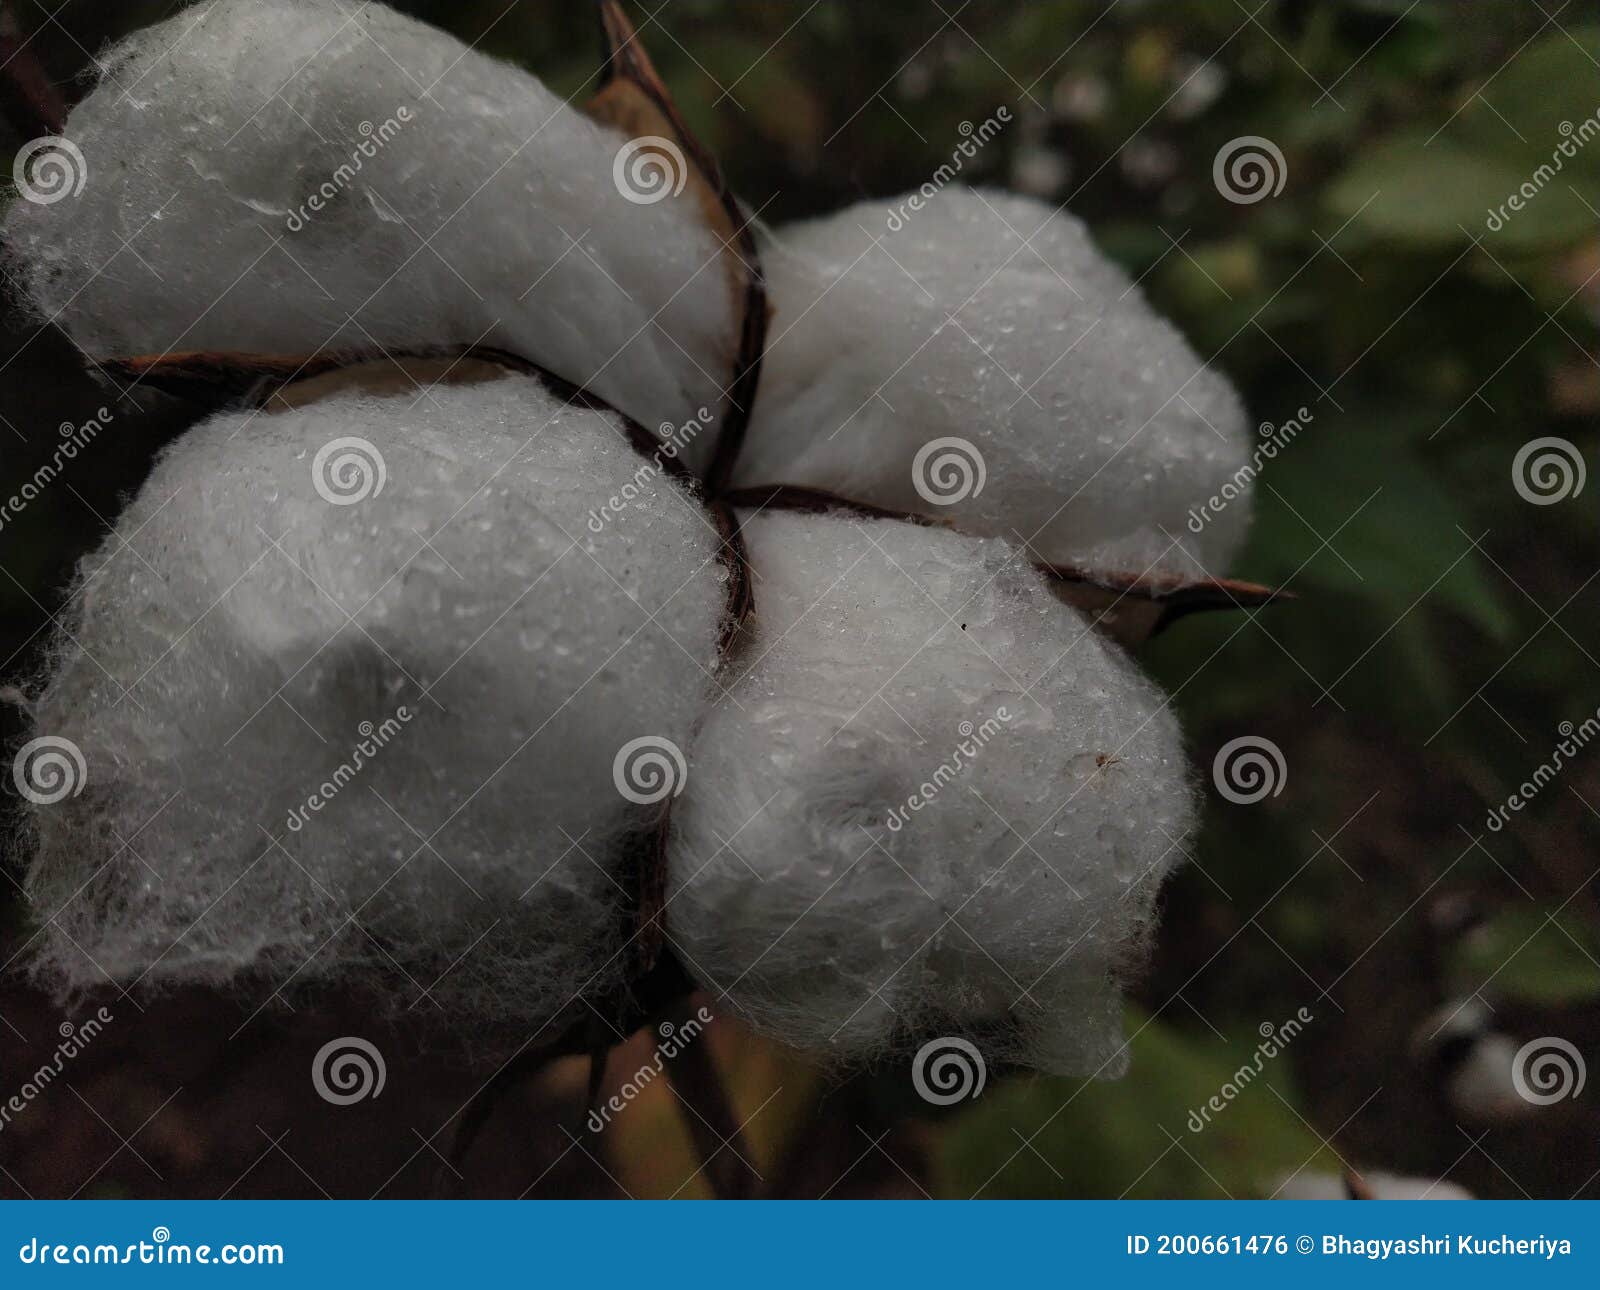 farmers silver.... truly invaluable cotton with dewdrops